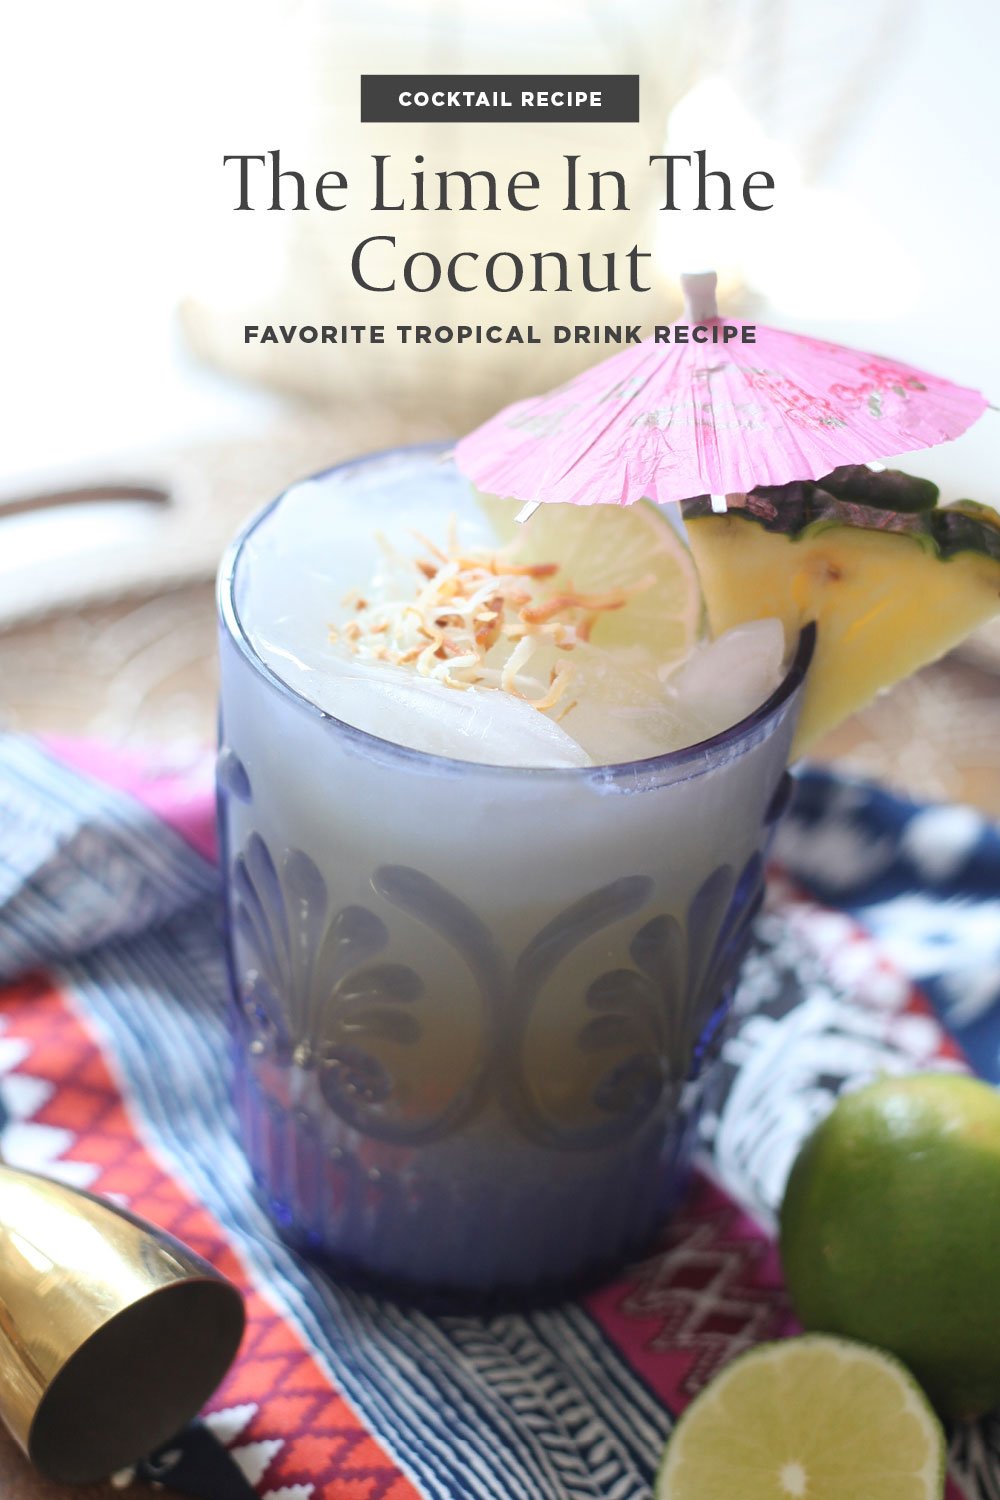 The Lime In The Coconut Cocktail Recipe - the perfect tropical drink